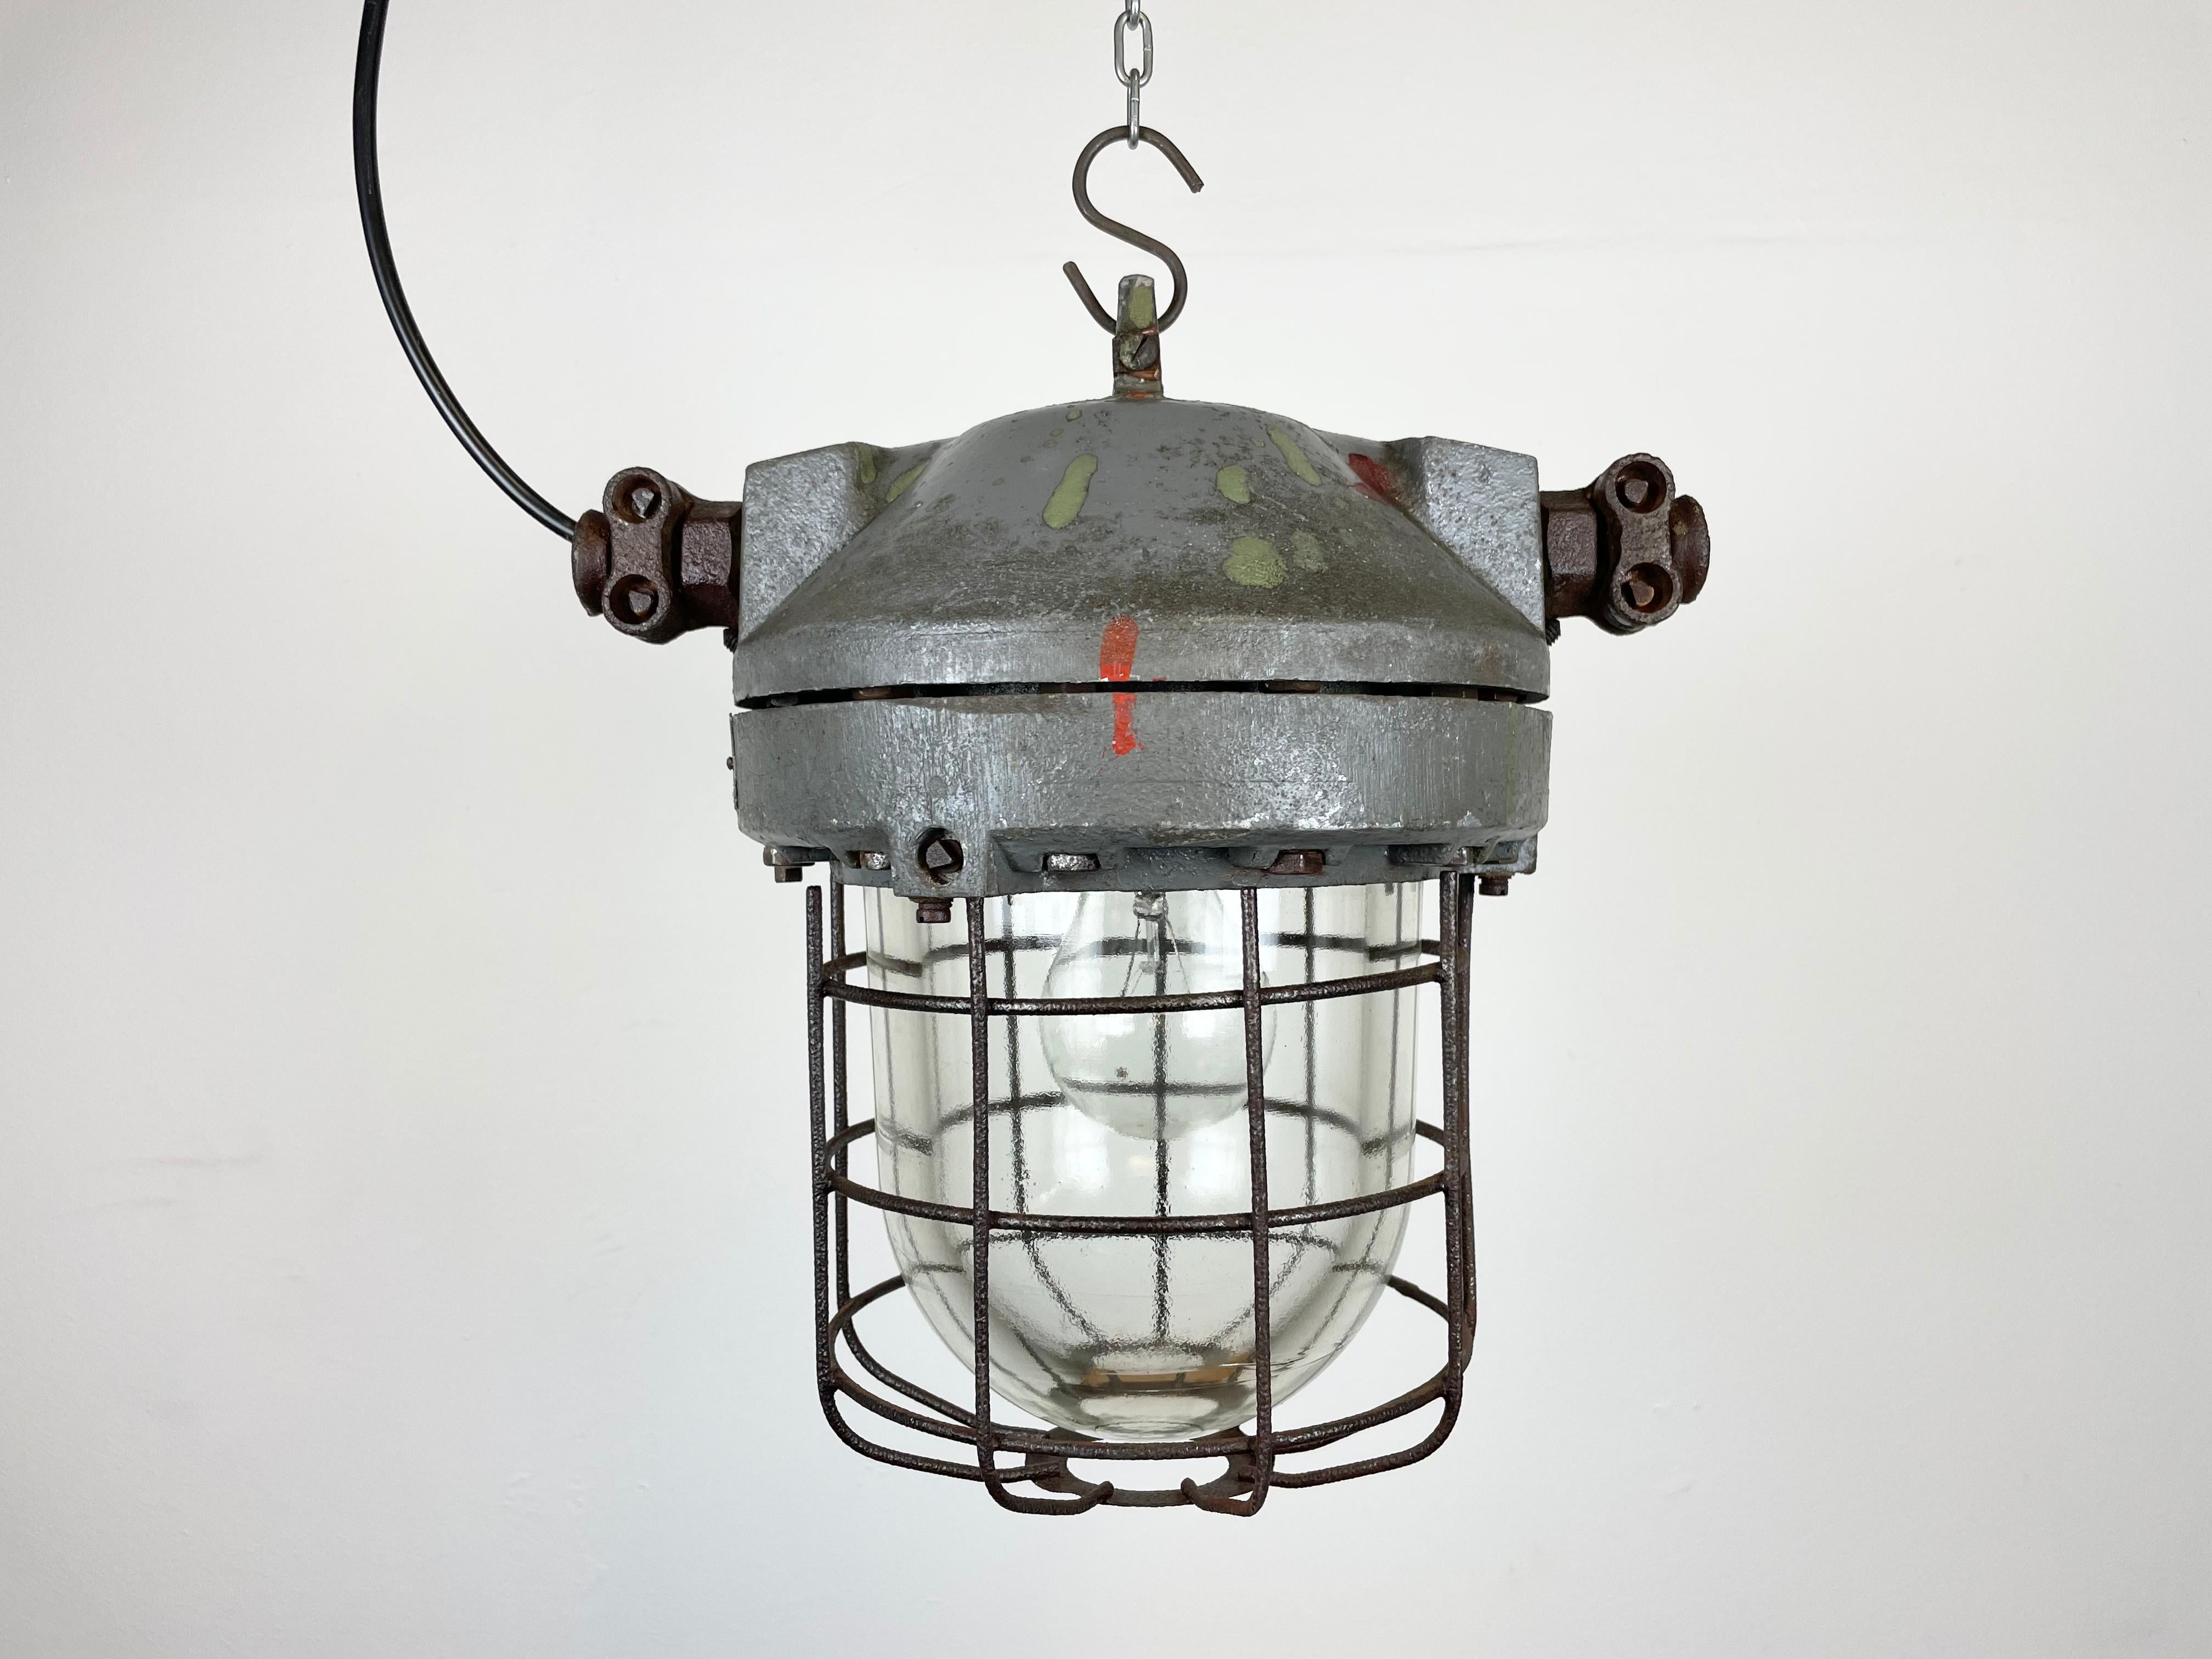 This industrial light was manufactured in former Czechoslovakia by Elektrosvit in the 1960s. It features a dark grey cast aluminum body, an iron cage and explosion-proof glass. The porcelain socket requires E 27 light bulbs.New wire. The weight of